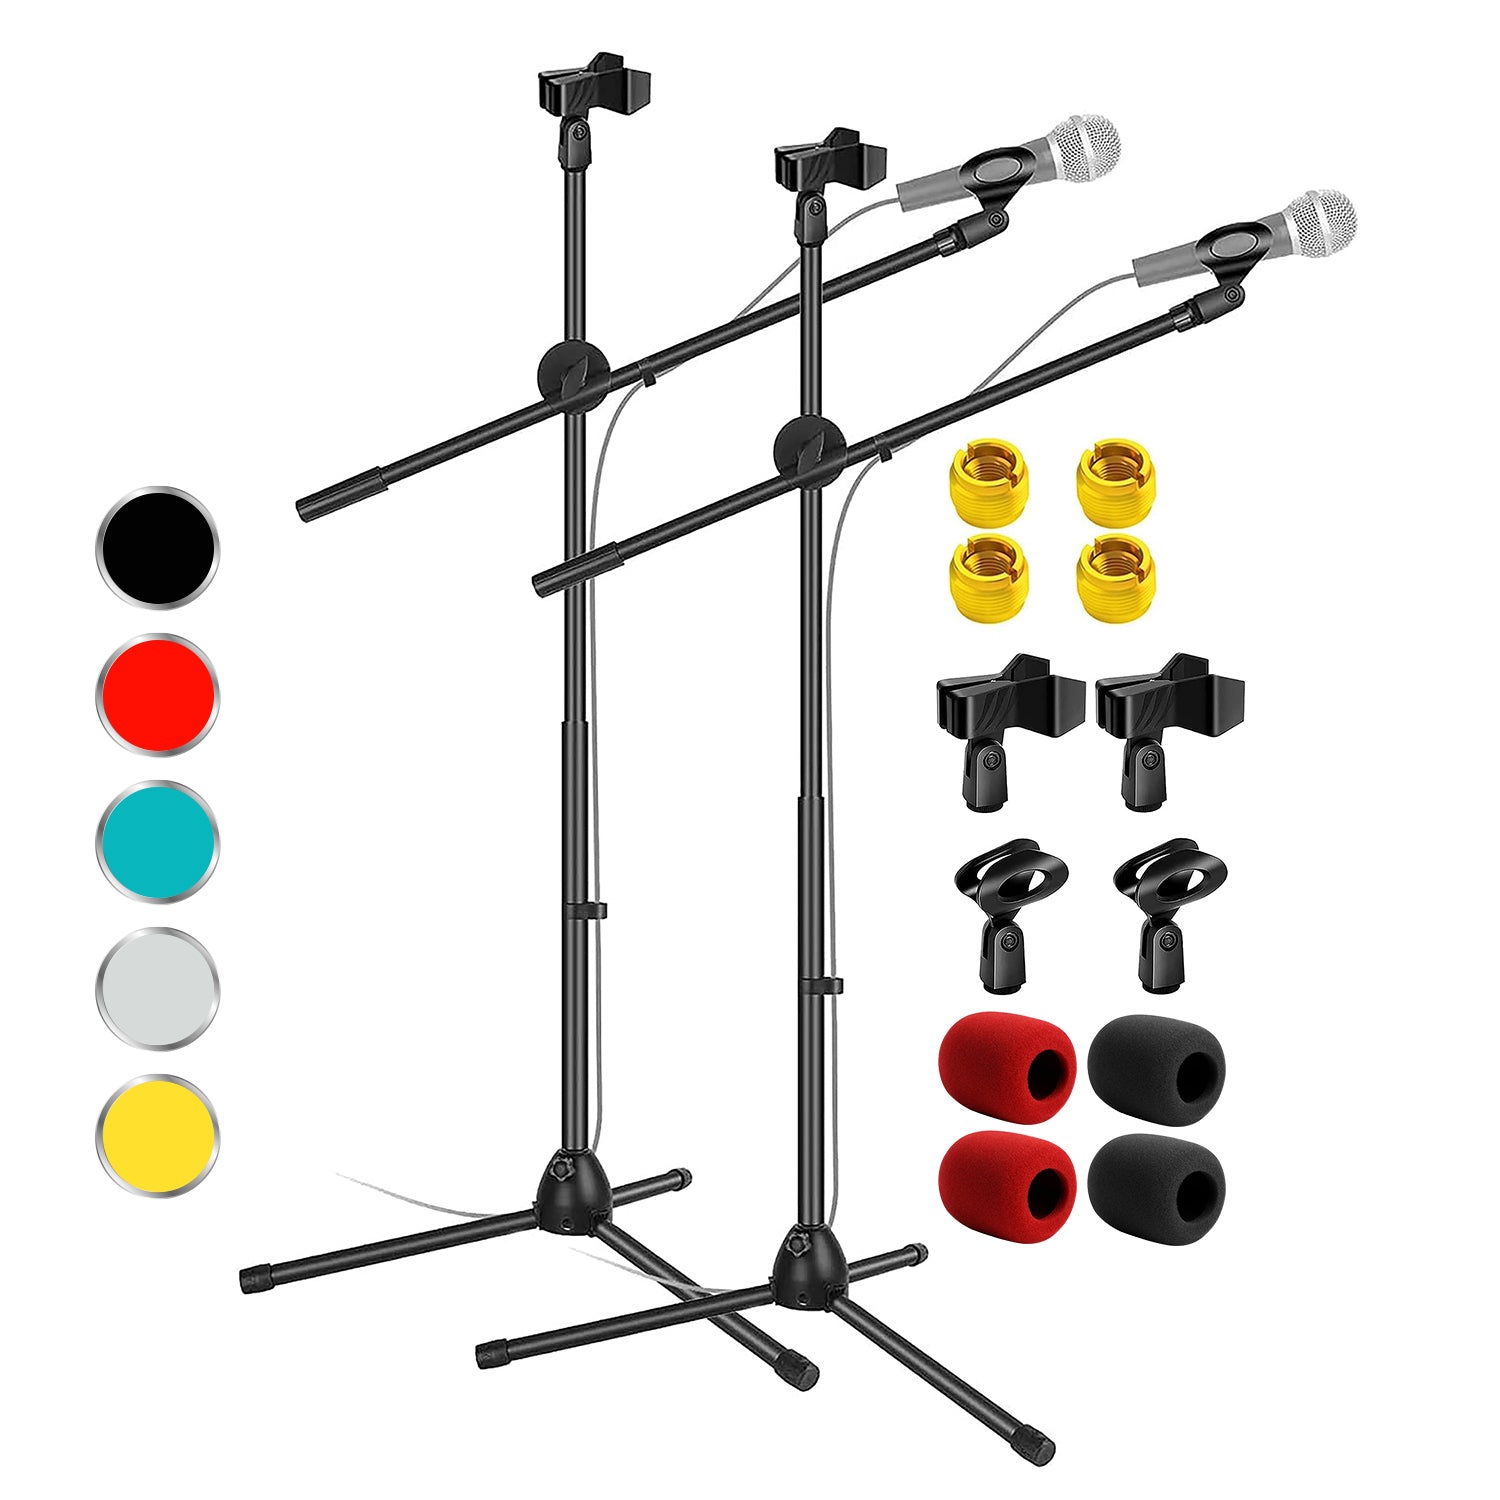 5 Core Tripod Mic Stand 59" Adjustable Microphone Stands Floor w Boom Arm 1/2/4/6/12 Pc